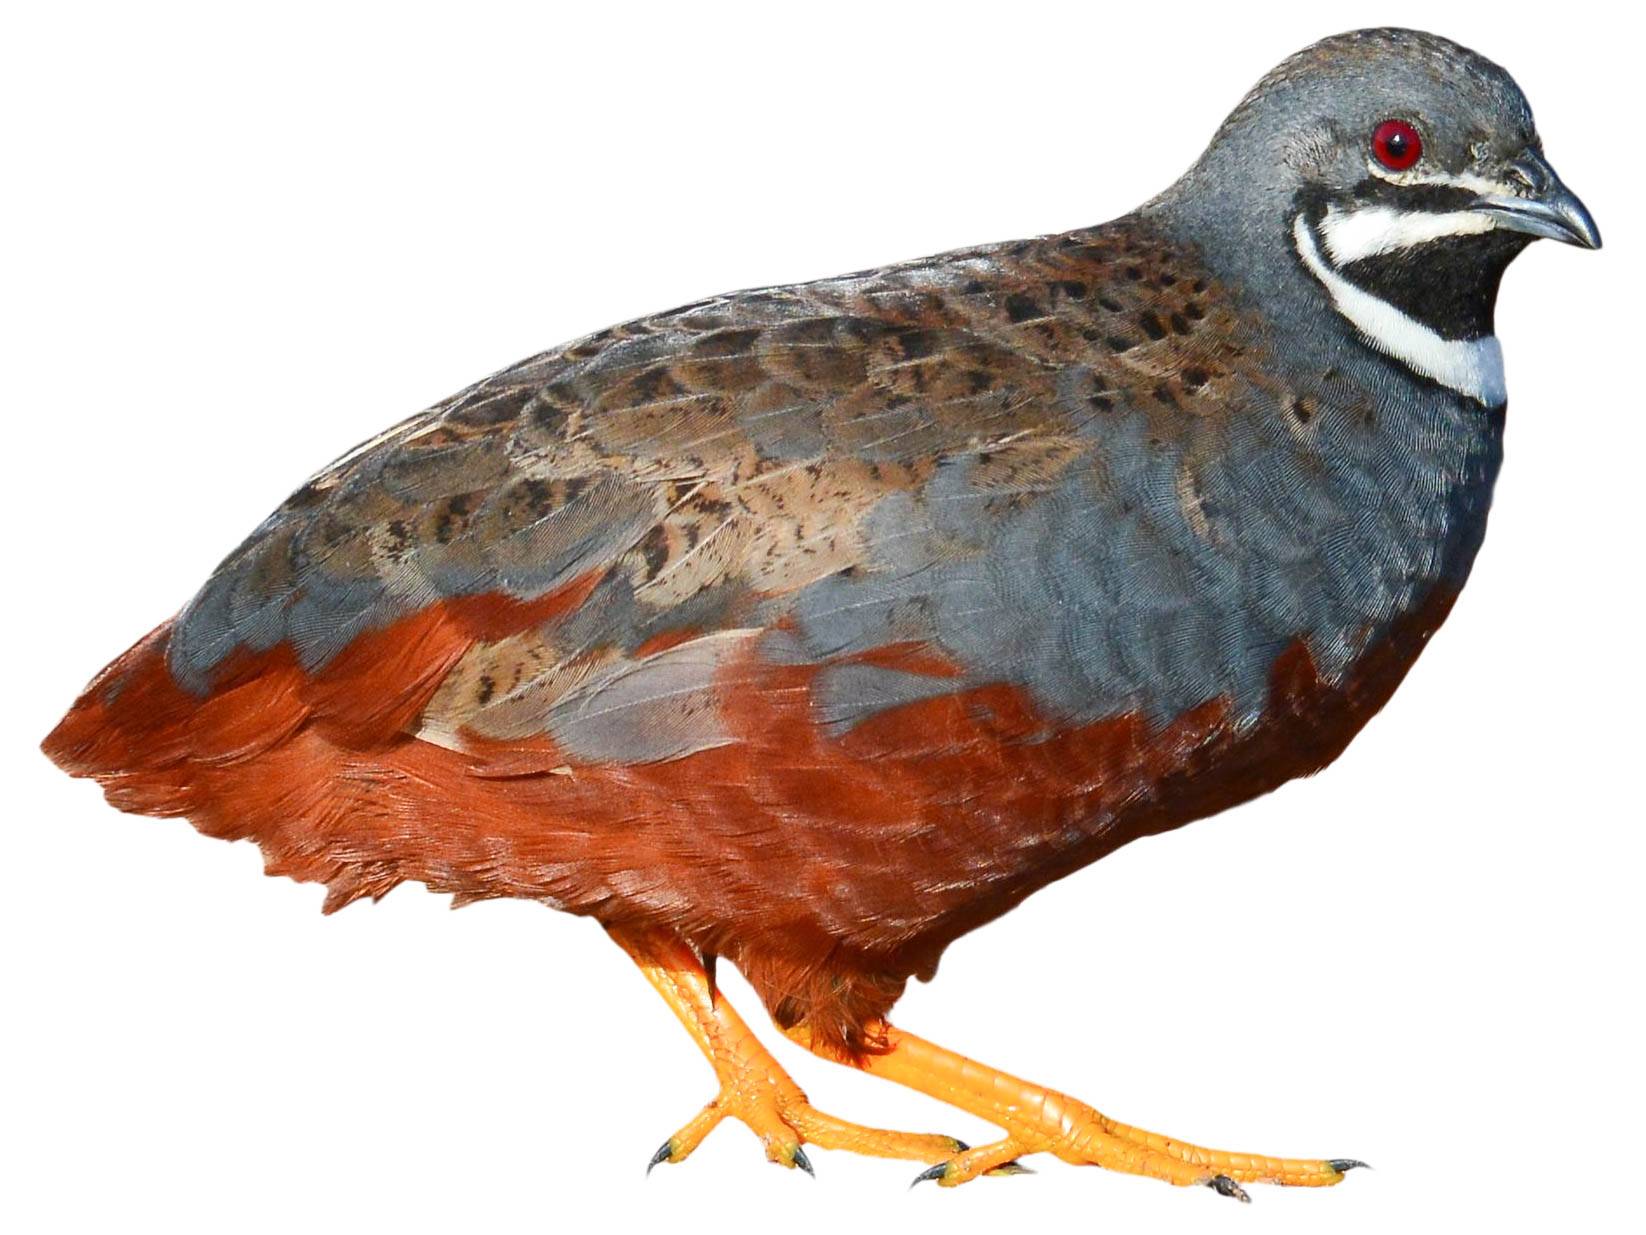 A photo of a King Quail (Synoicus chinensis), male